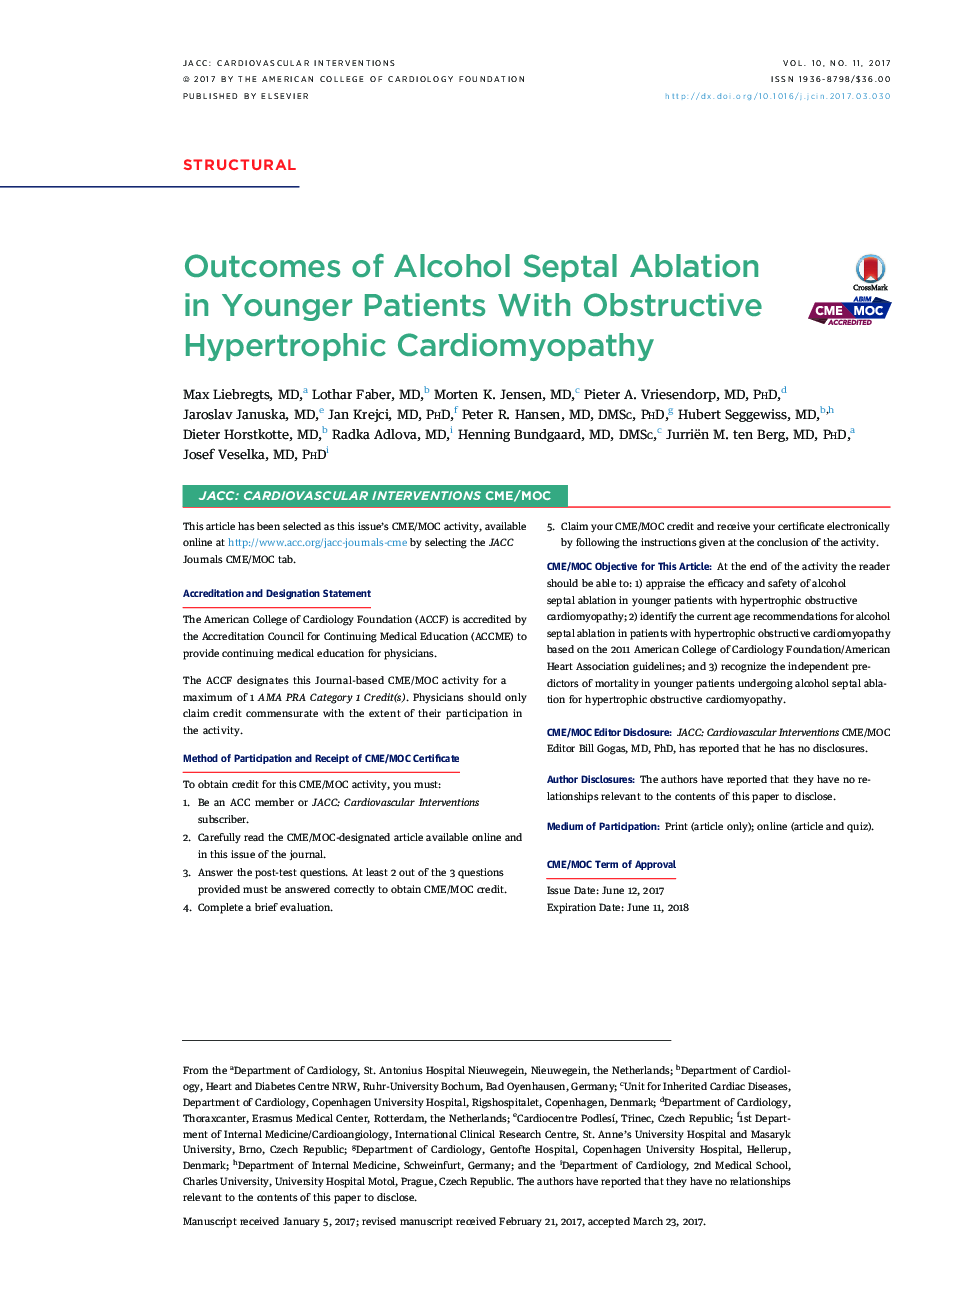 StructuralOutcomes of Alcohol Septal Ablation inÂ YoungerÂ Patients With Obstructive HypertrophicÂ Cardiomyopathy